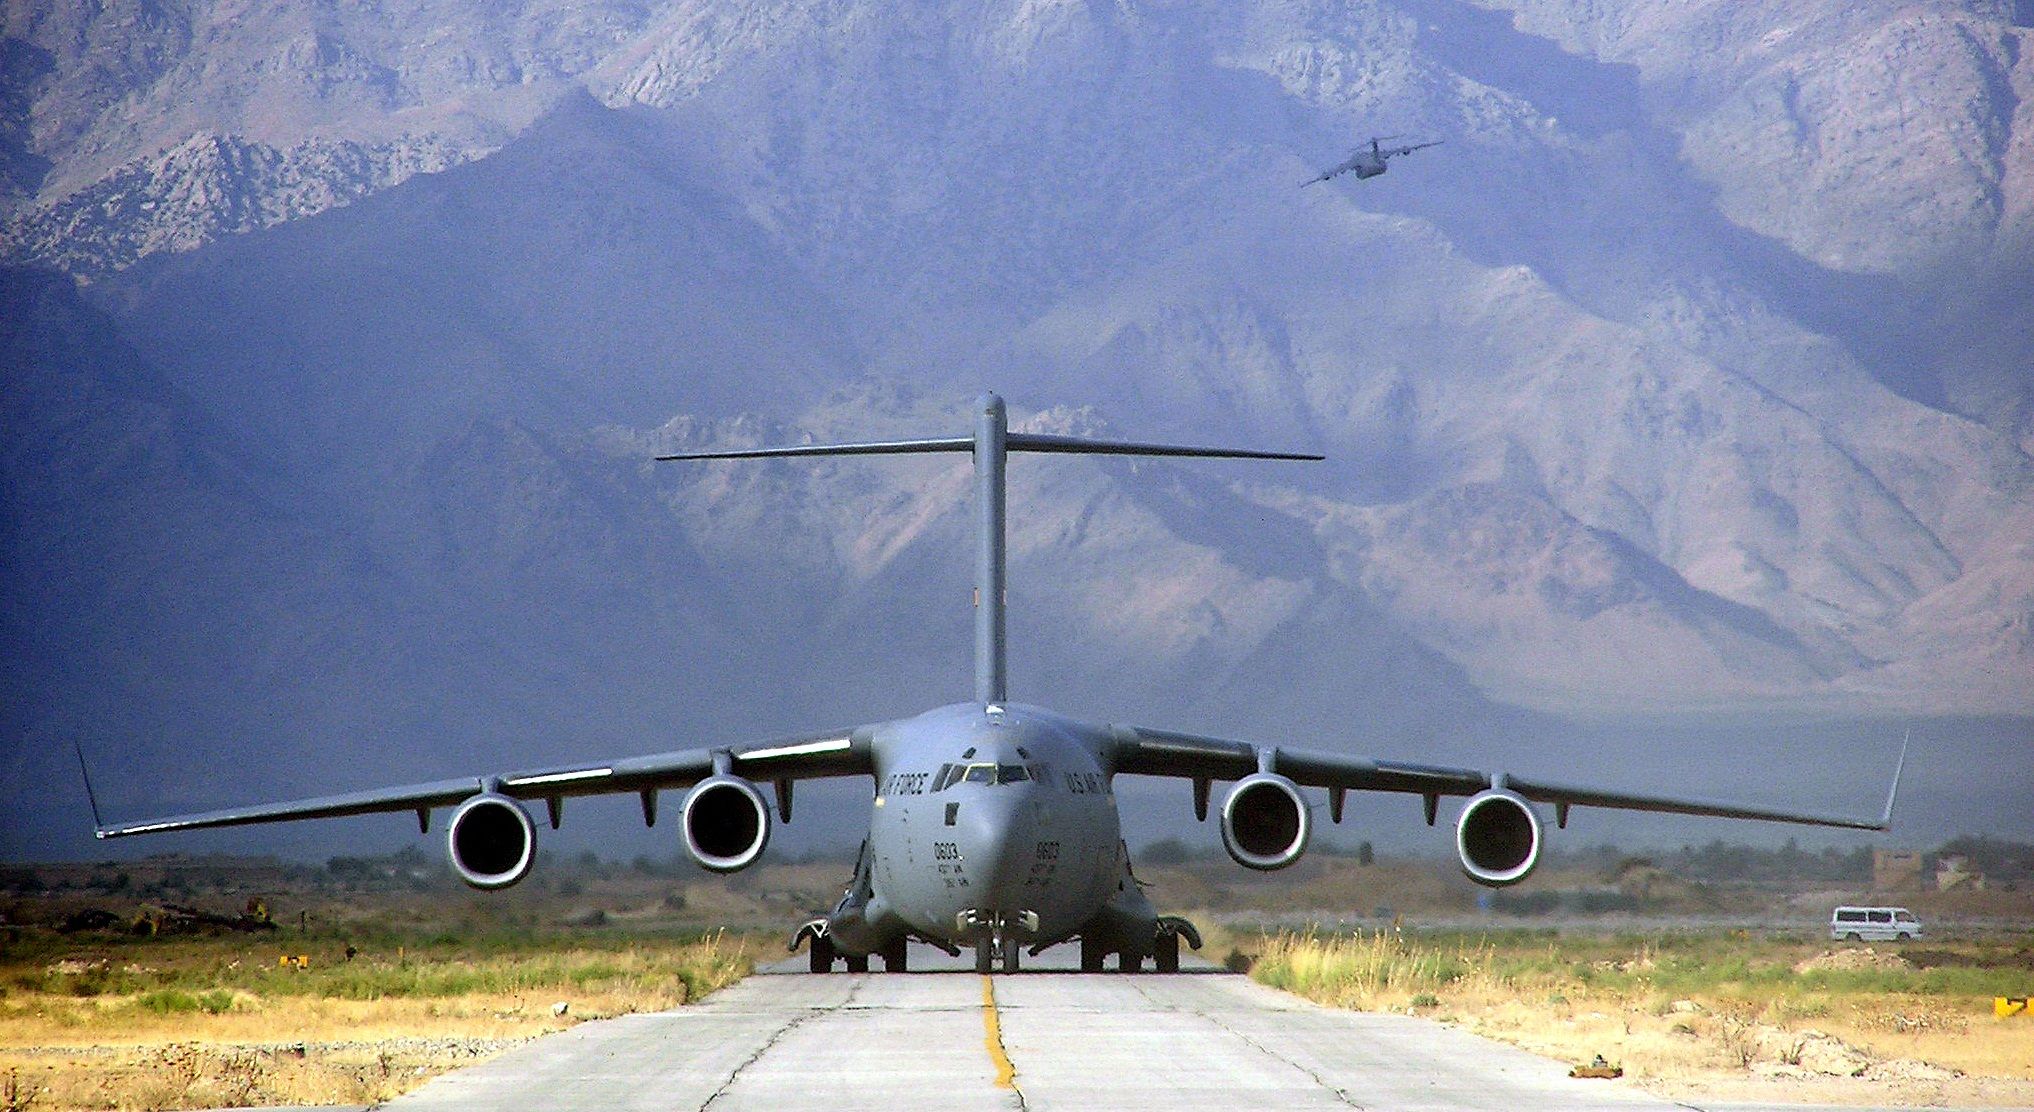 A large military transport aircraft on  a runway.